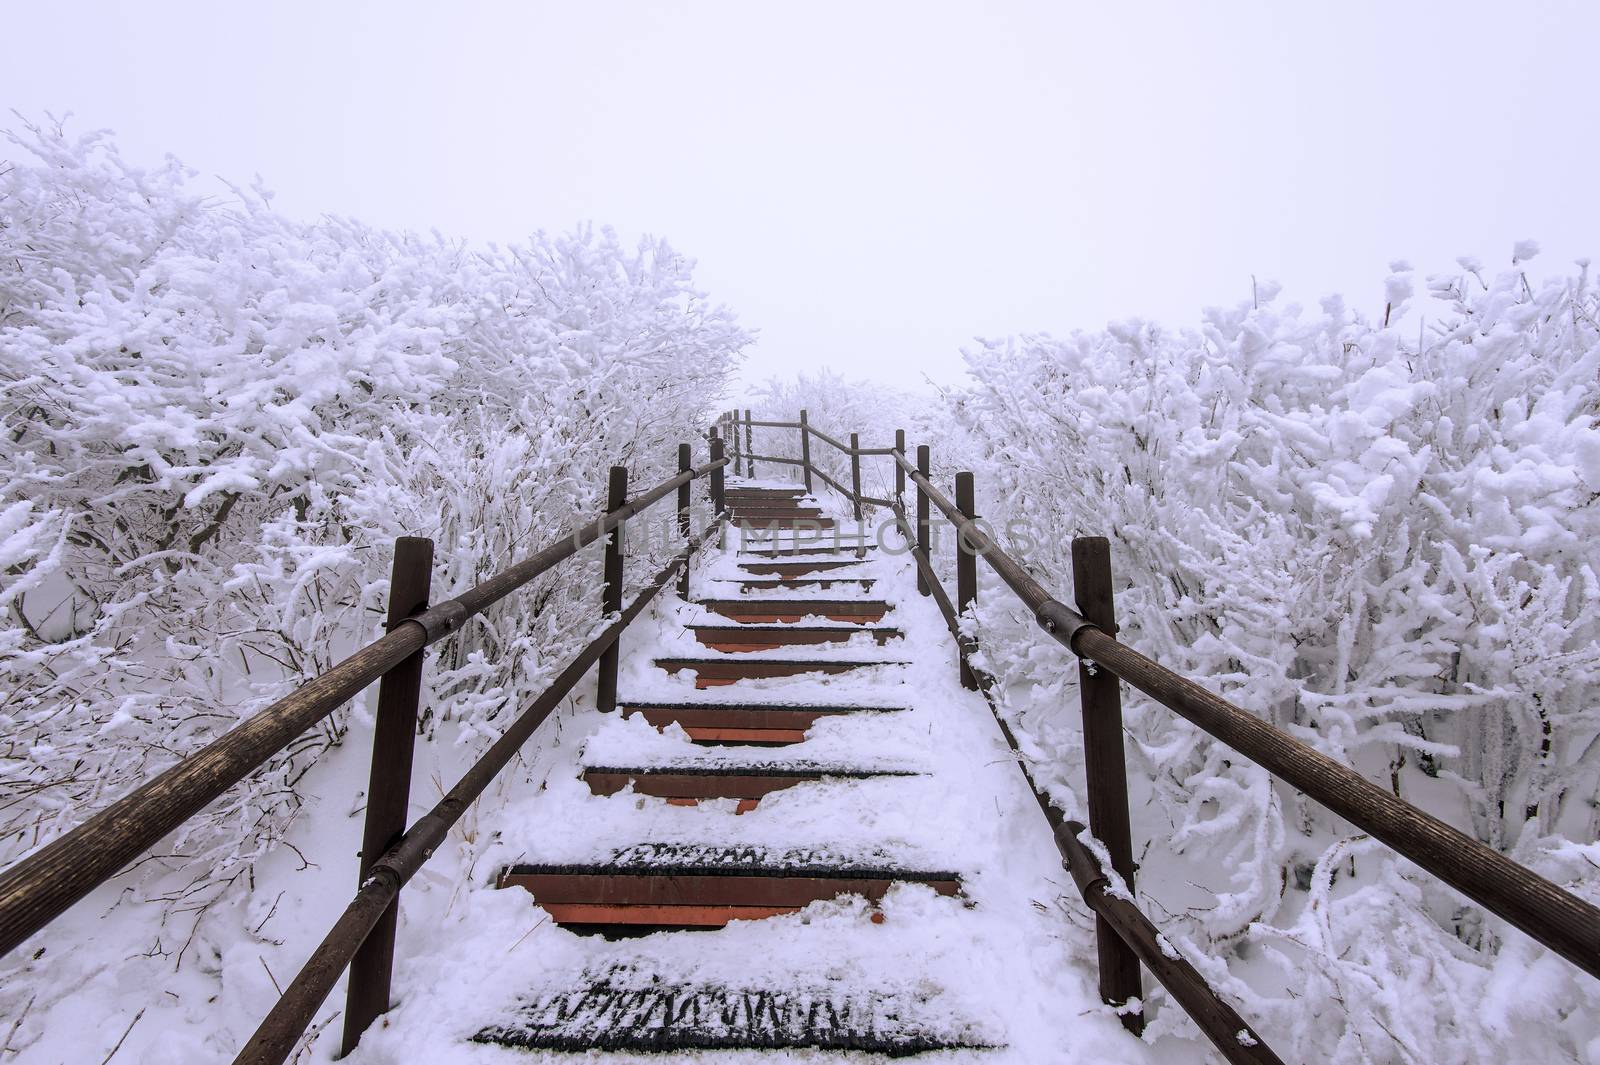 Wooden stairs on a hillside in winter. Deogyusan mountains in So by gutarphotoghaphy